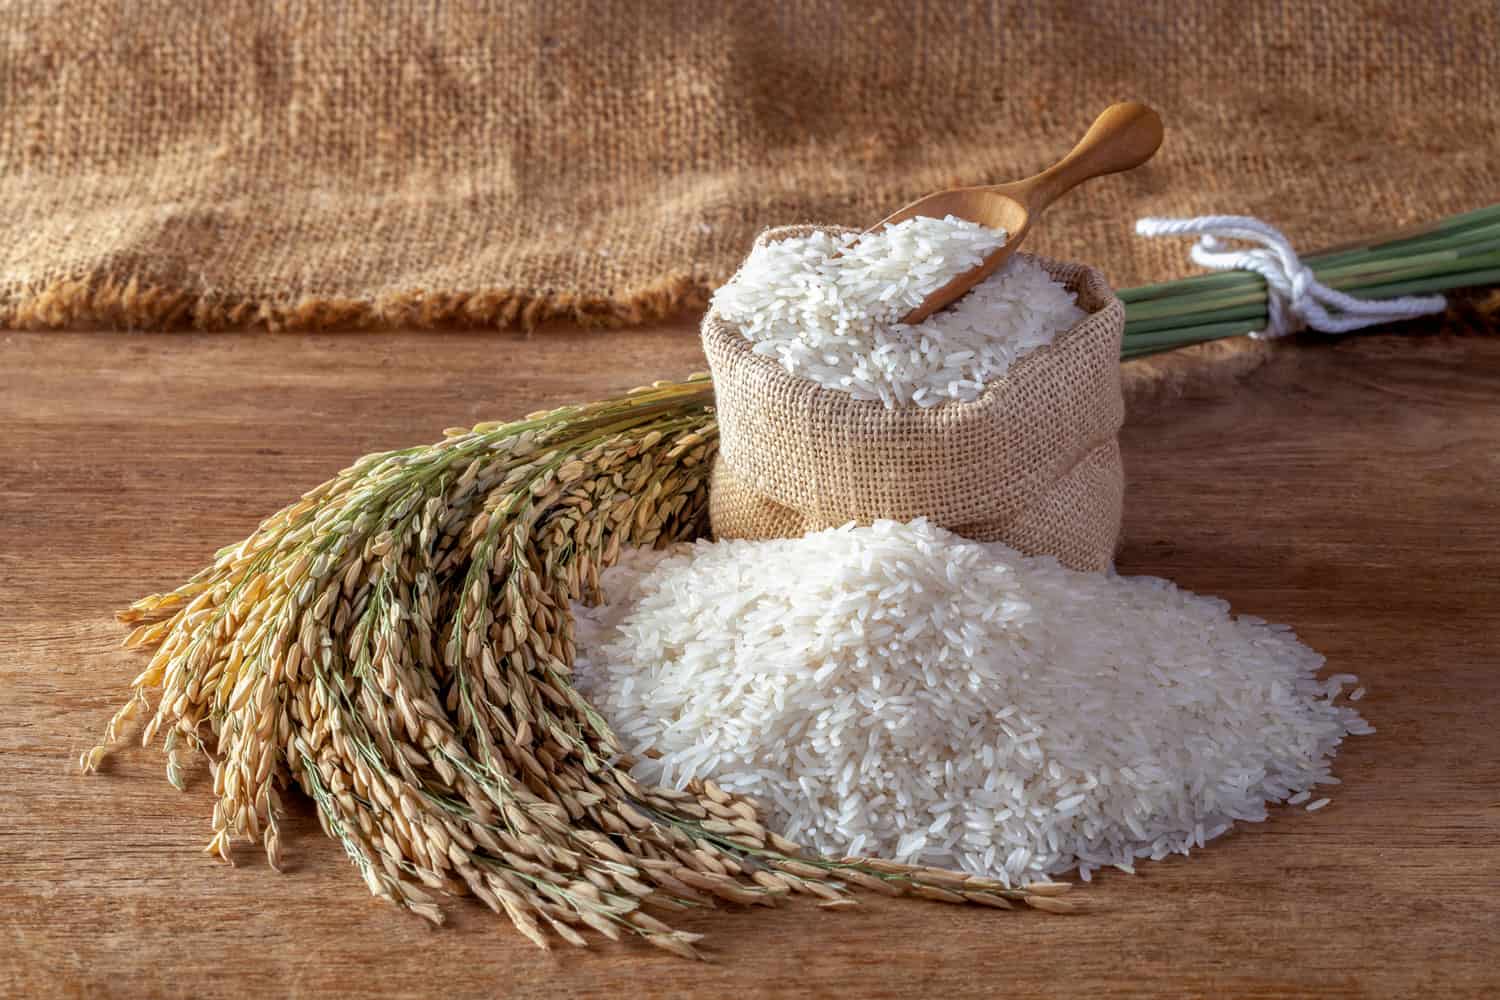 White rice (jasmine rice) in a sack on a wooden background, 6 Ways To Strain Rice Without A Strainer